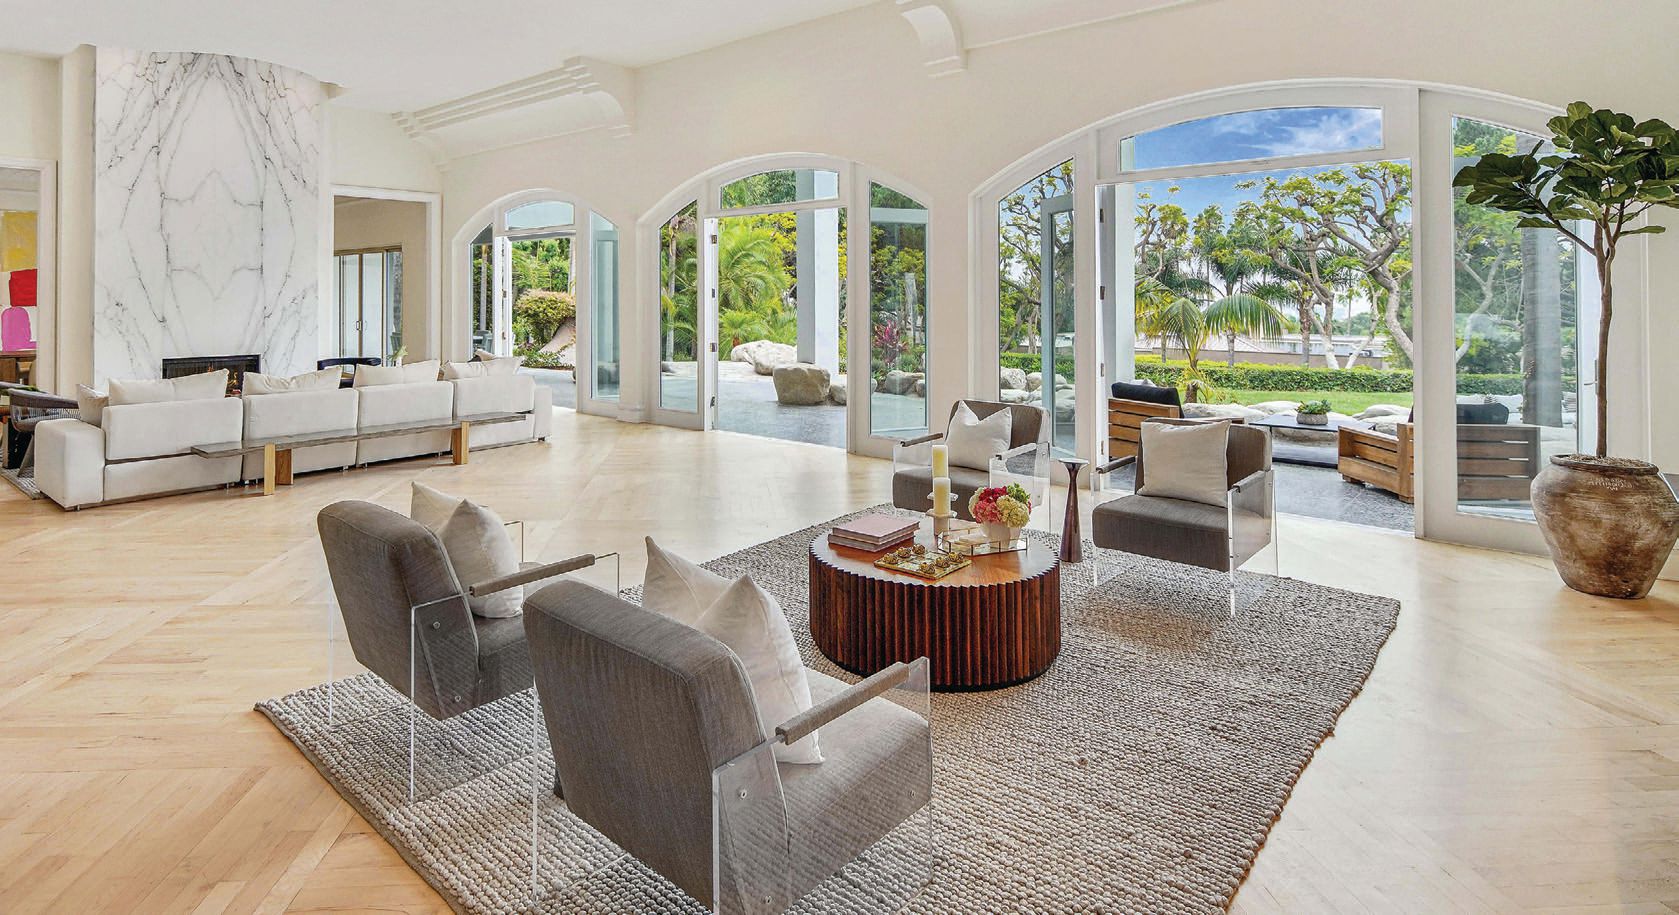 French doors in the living room open to the lush outdoor space. PHOTO BY NOEL KLEINMAN REAL ESTATE PHOTOGRAPHY